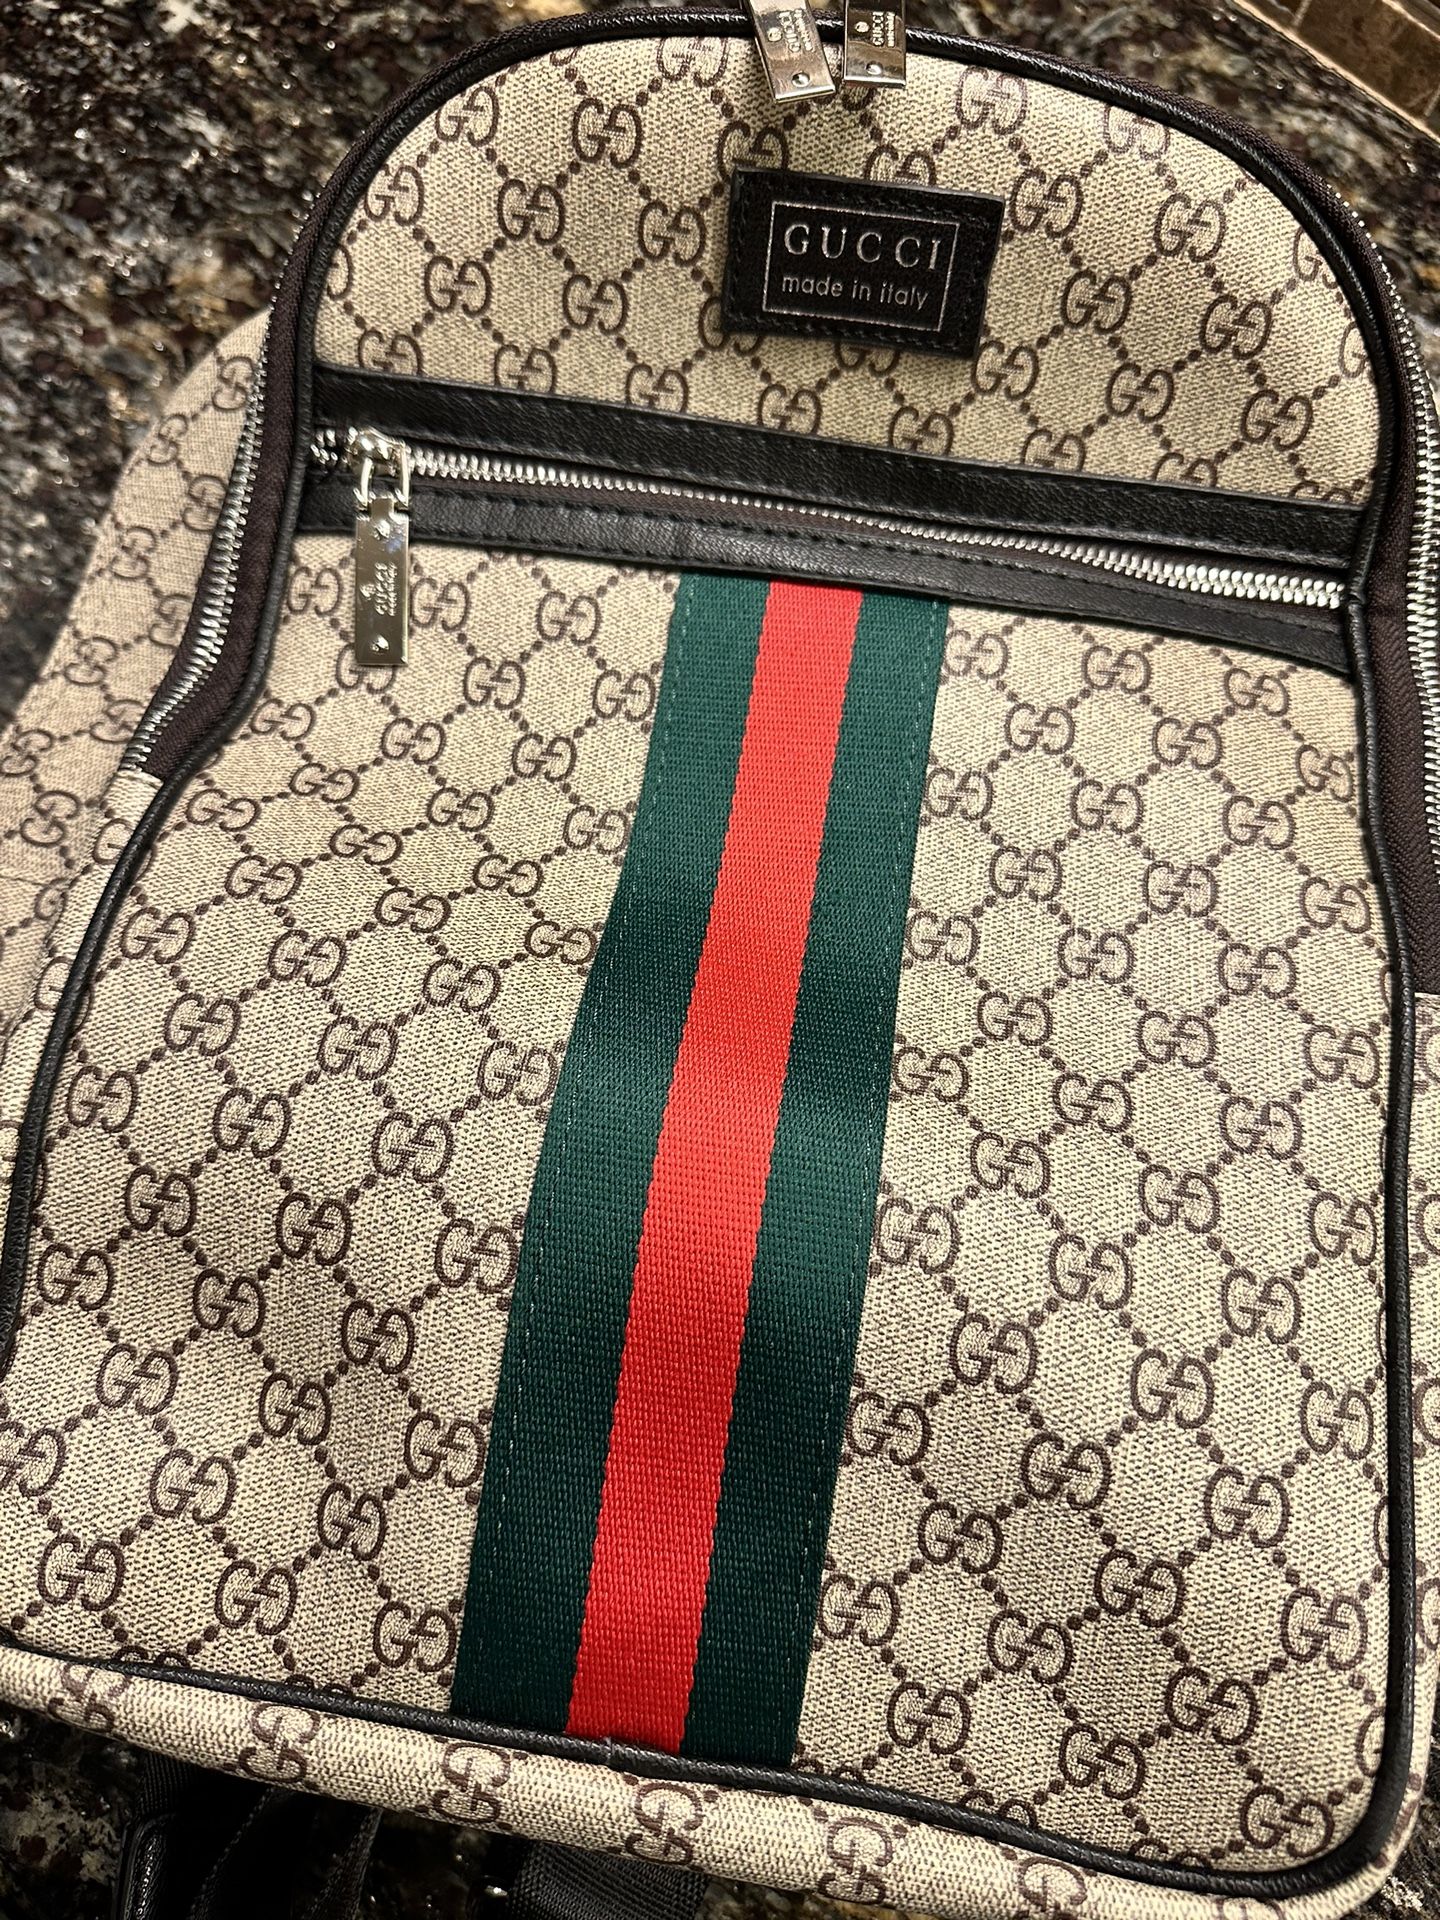 Gucci Backpack And Wallet